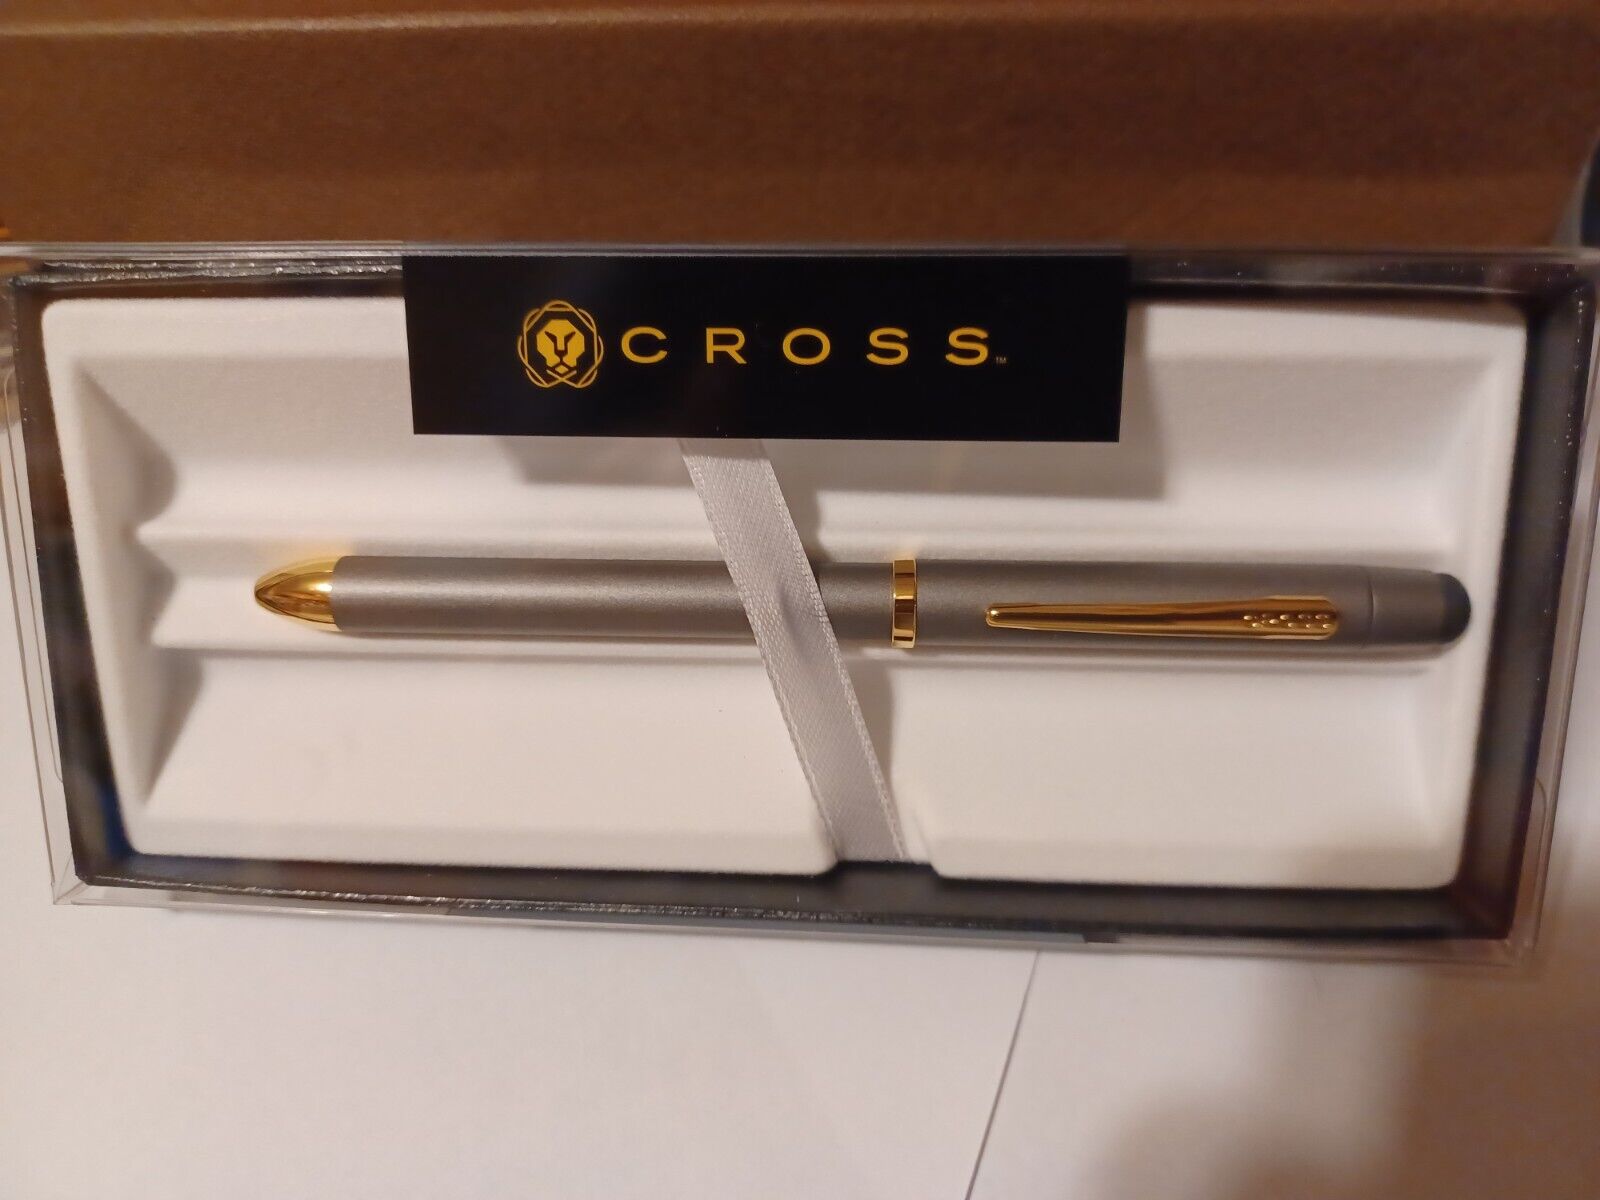 VERY RARE Cross Tech3 Titanium and 23kt gold Multi-Function Pen NEW $80 GIFT